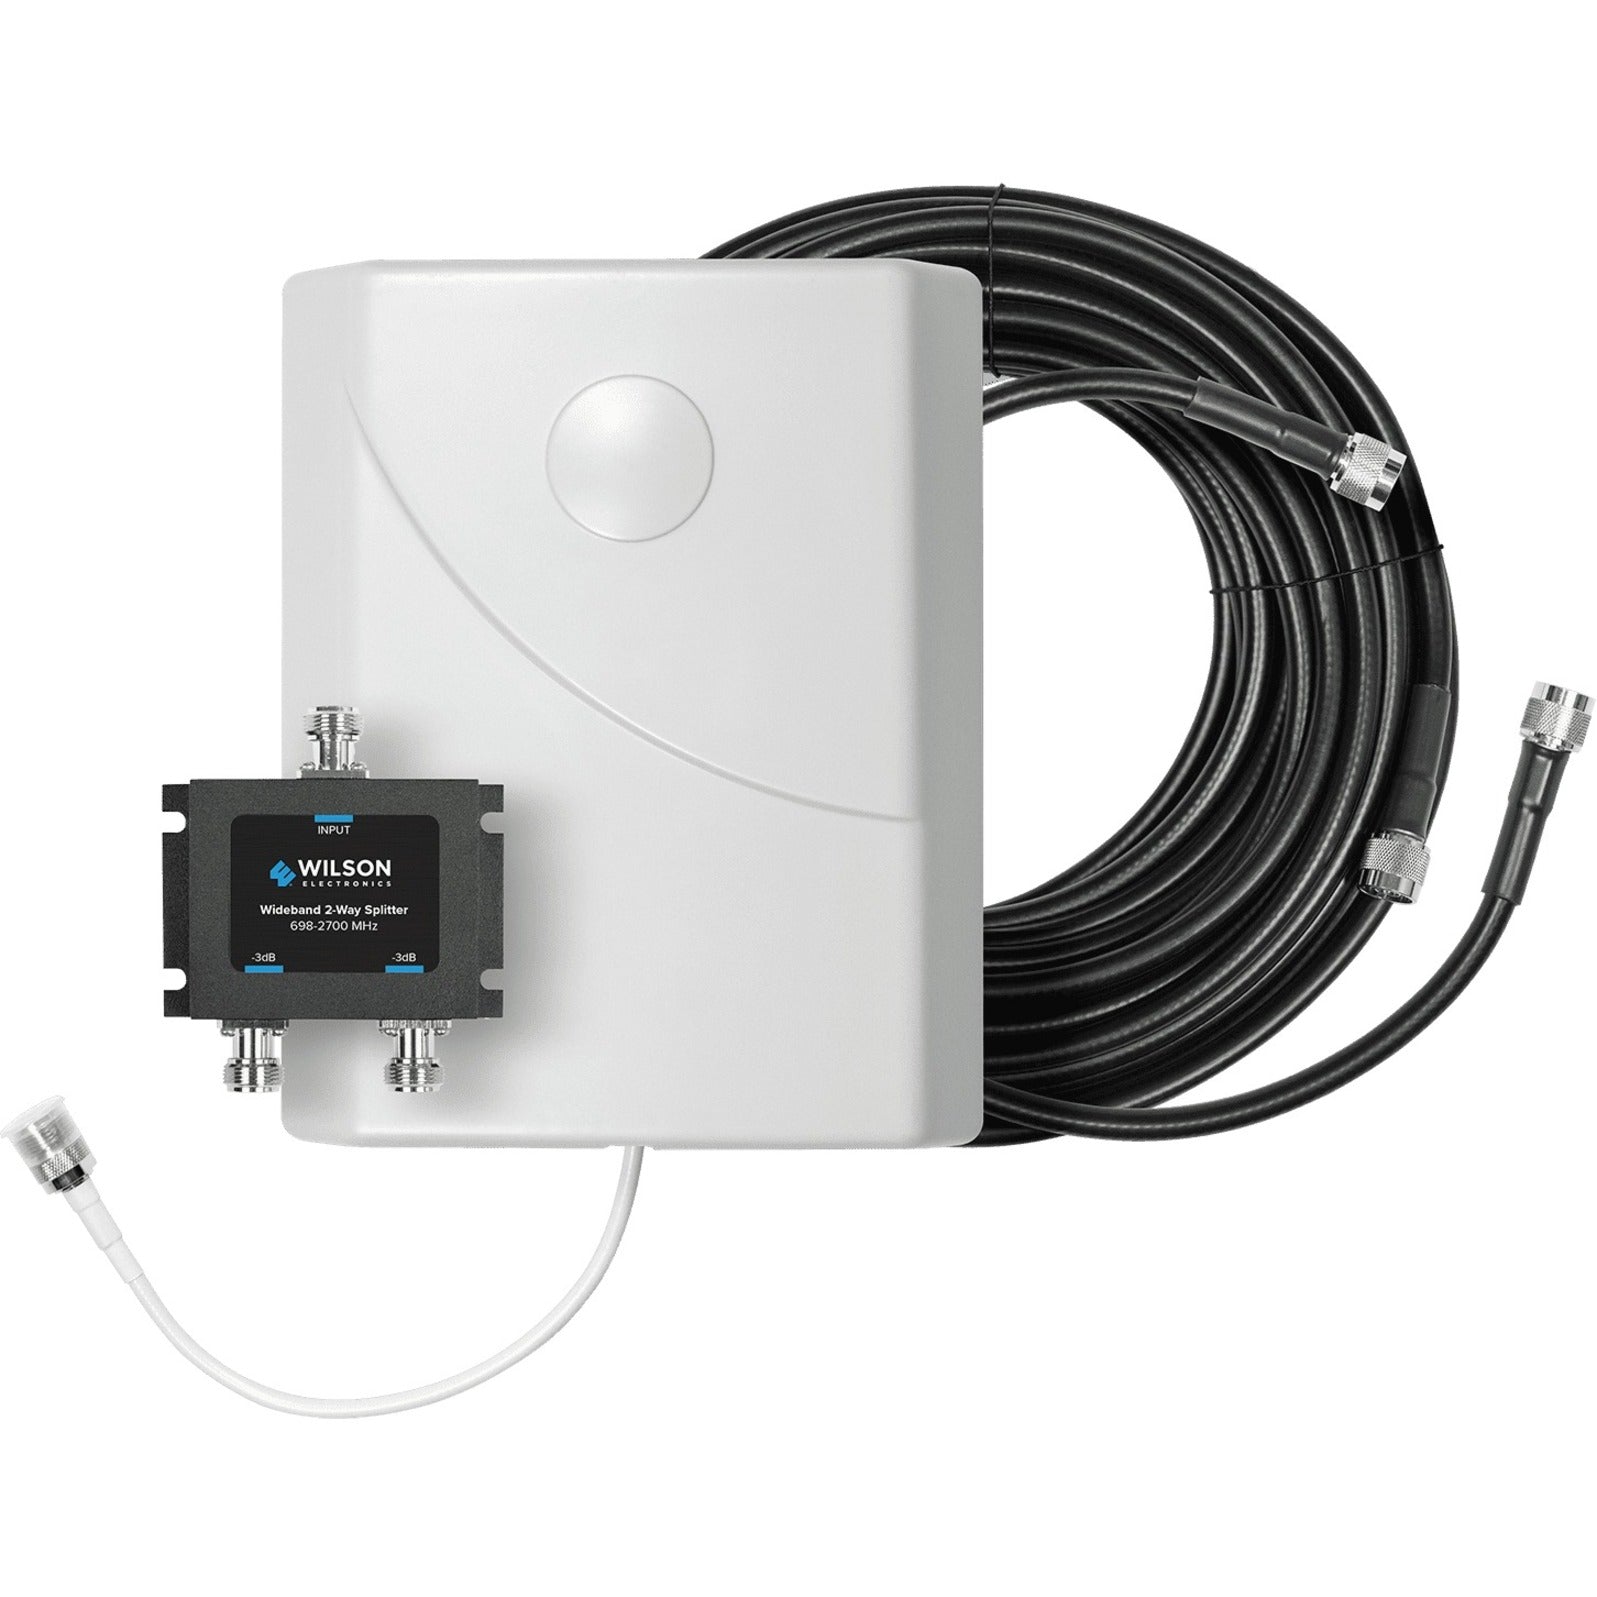 Wilson 309906-50N Single Antenna Expansion Kit 50 Ohm - Improve Signal Strength and Coverage in Your Home or Office